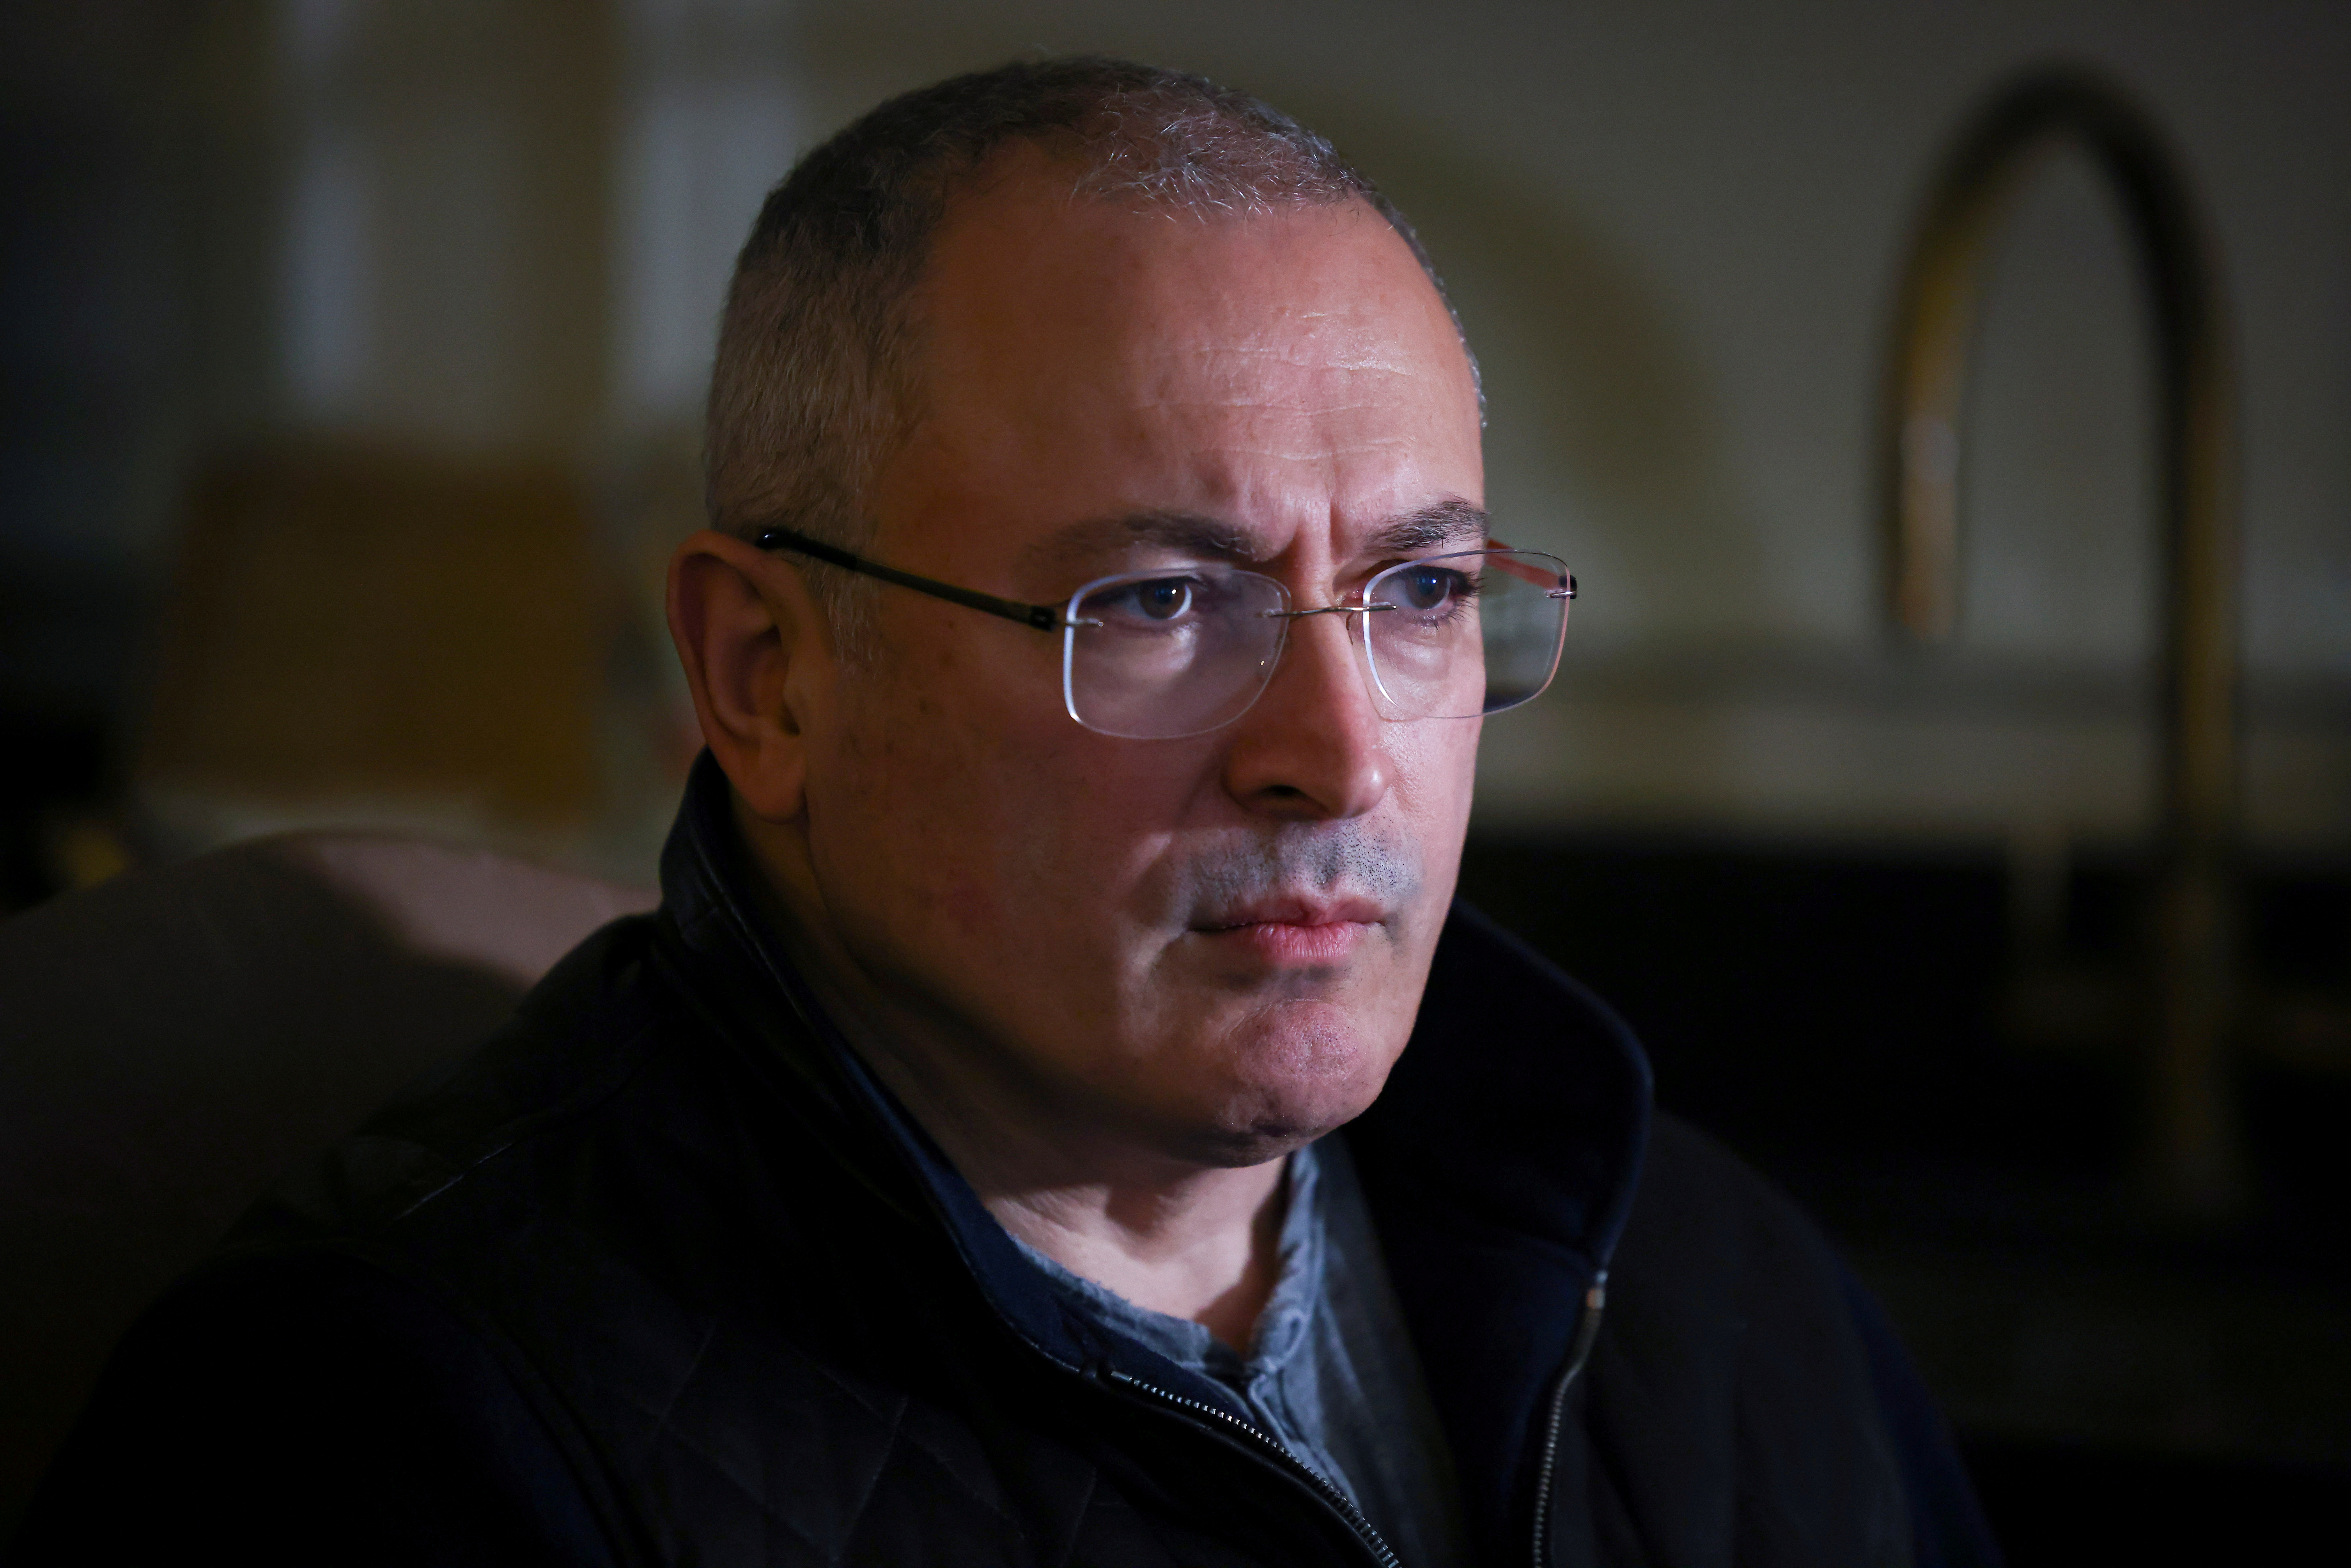 Former Russian tycoon Mikhail Khodorkovsky attends an interview with Reuters in central London, Britain